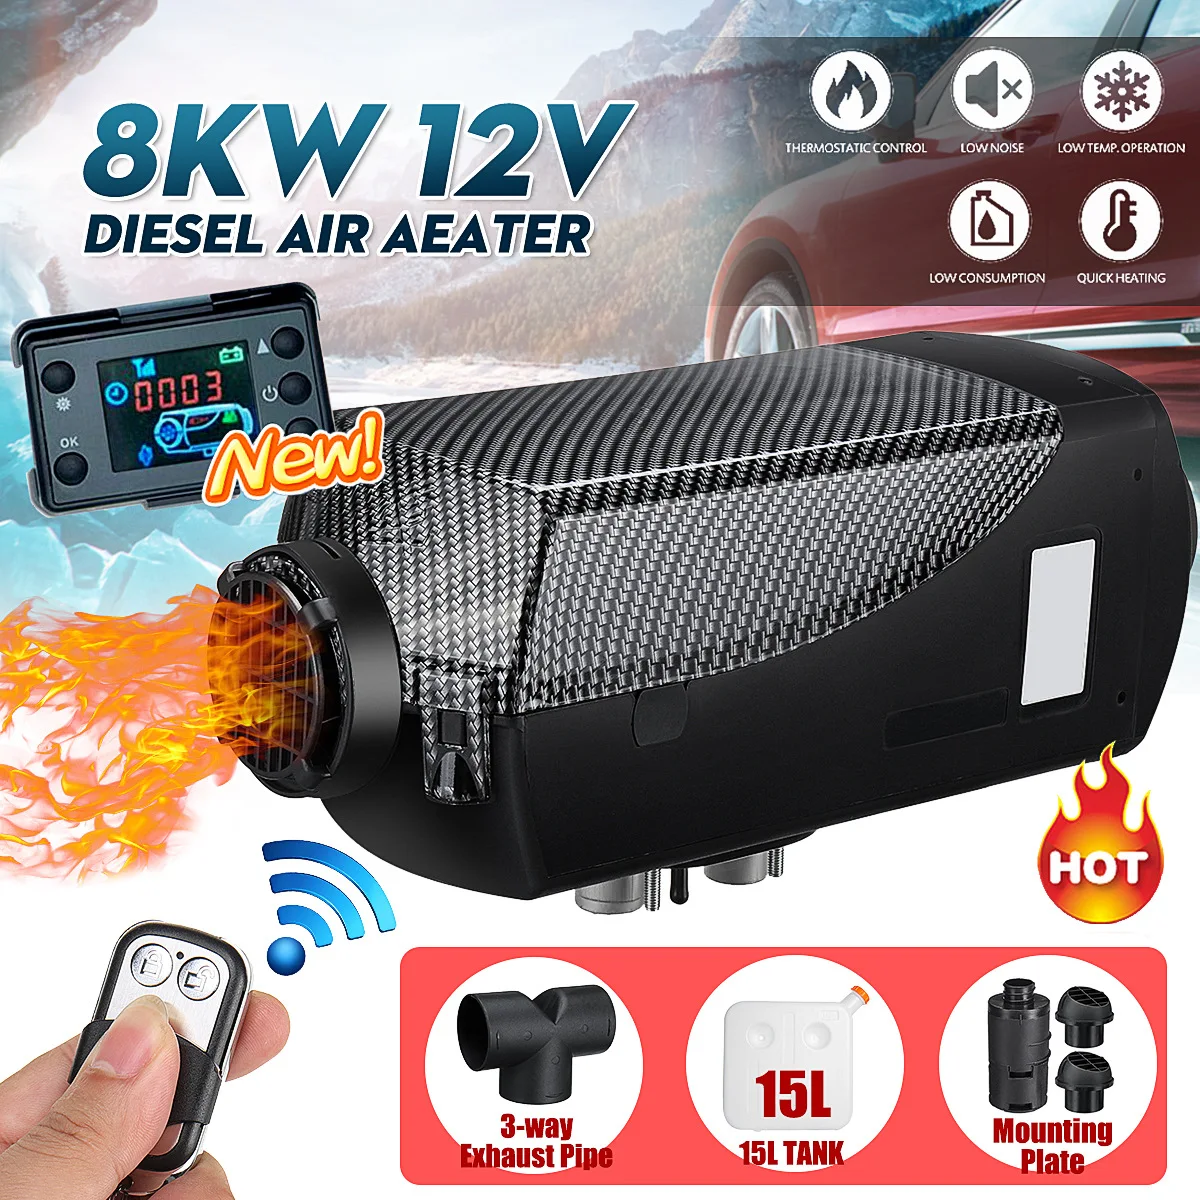 

Car Heater 8KW 12V 24V Air Diesel Heater 2 Air Outlet LCD Monitor + 15L Tank Remote Control For RV Boats Trailer Truck Motorhome